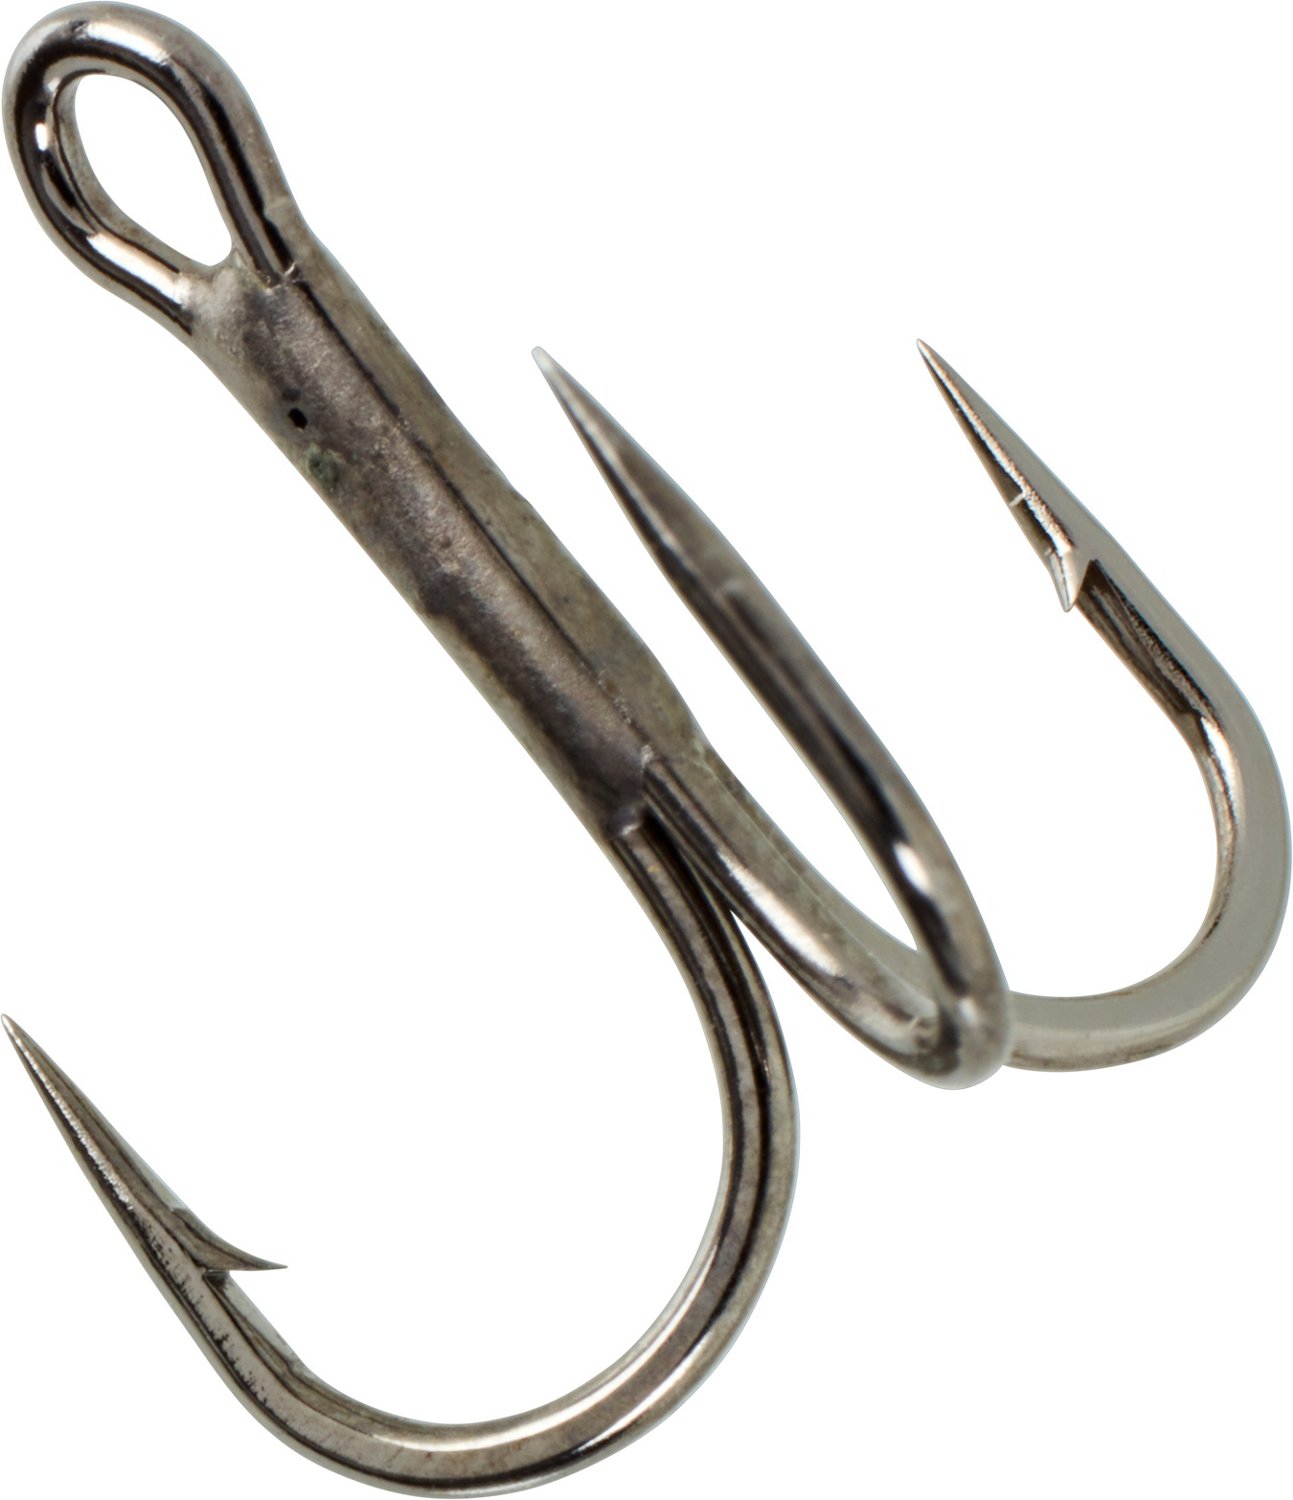 H2OX # Personal Treble Hook 6 Pack